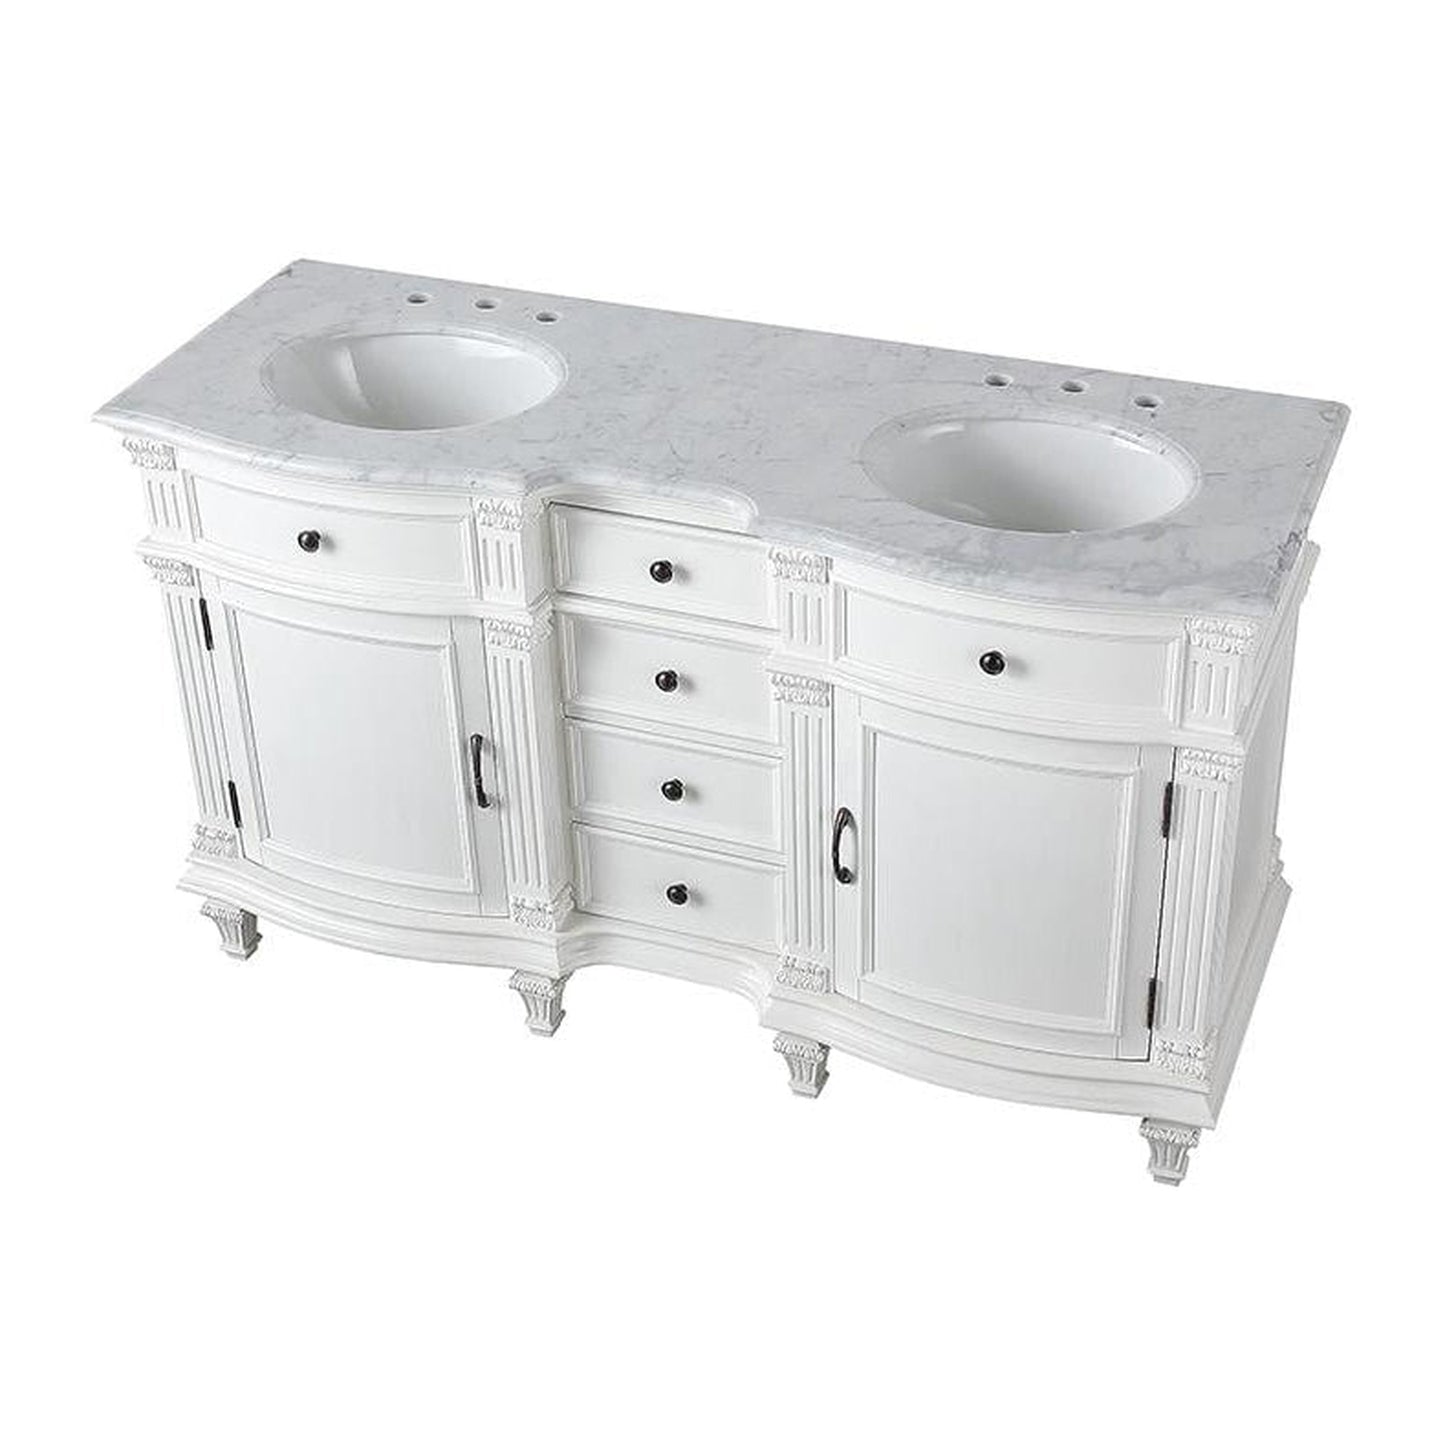 Silkroad Exclusive 60" Double Sink Antique White Bathroom Vanity With Carrara White Marble Countertop and White Ceramic Undermount Sink